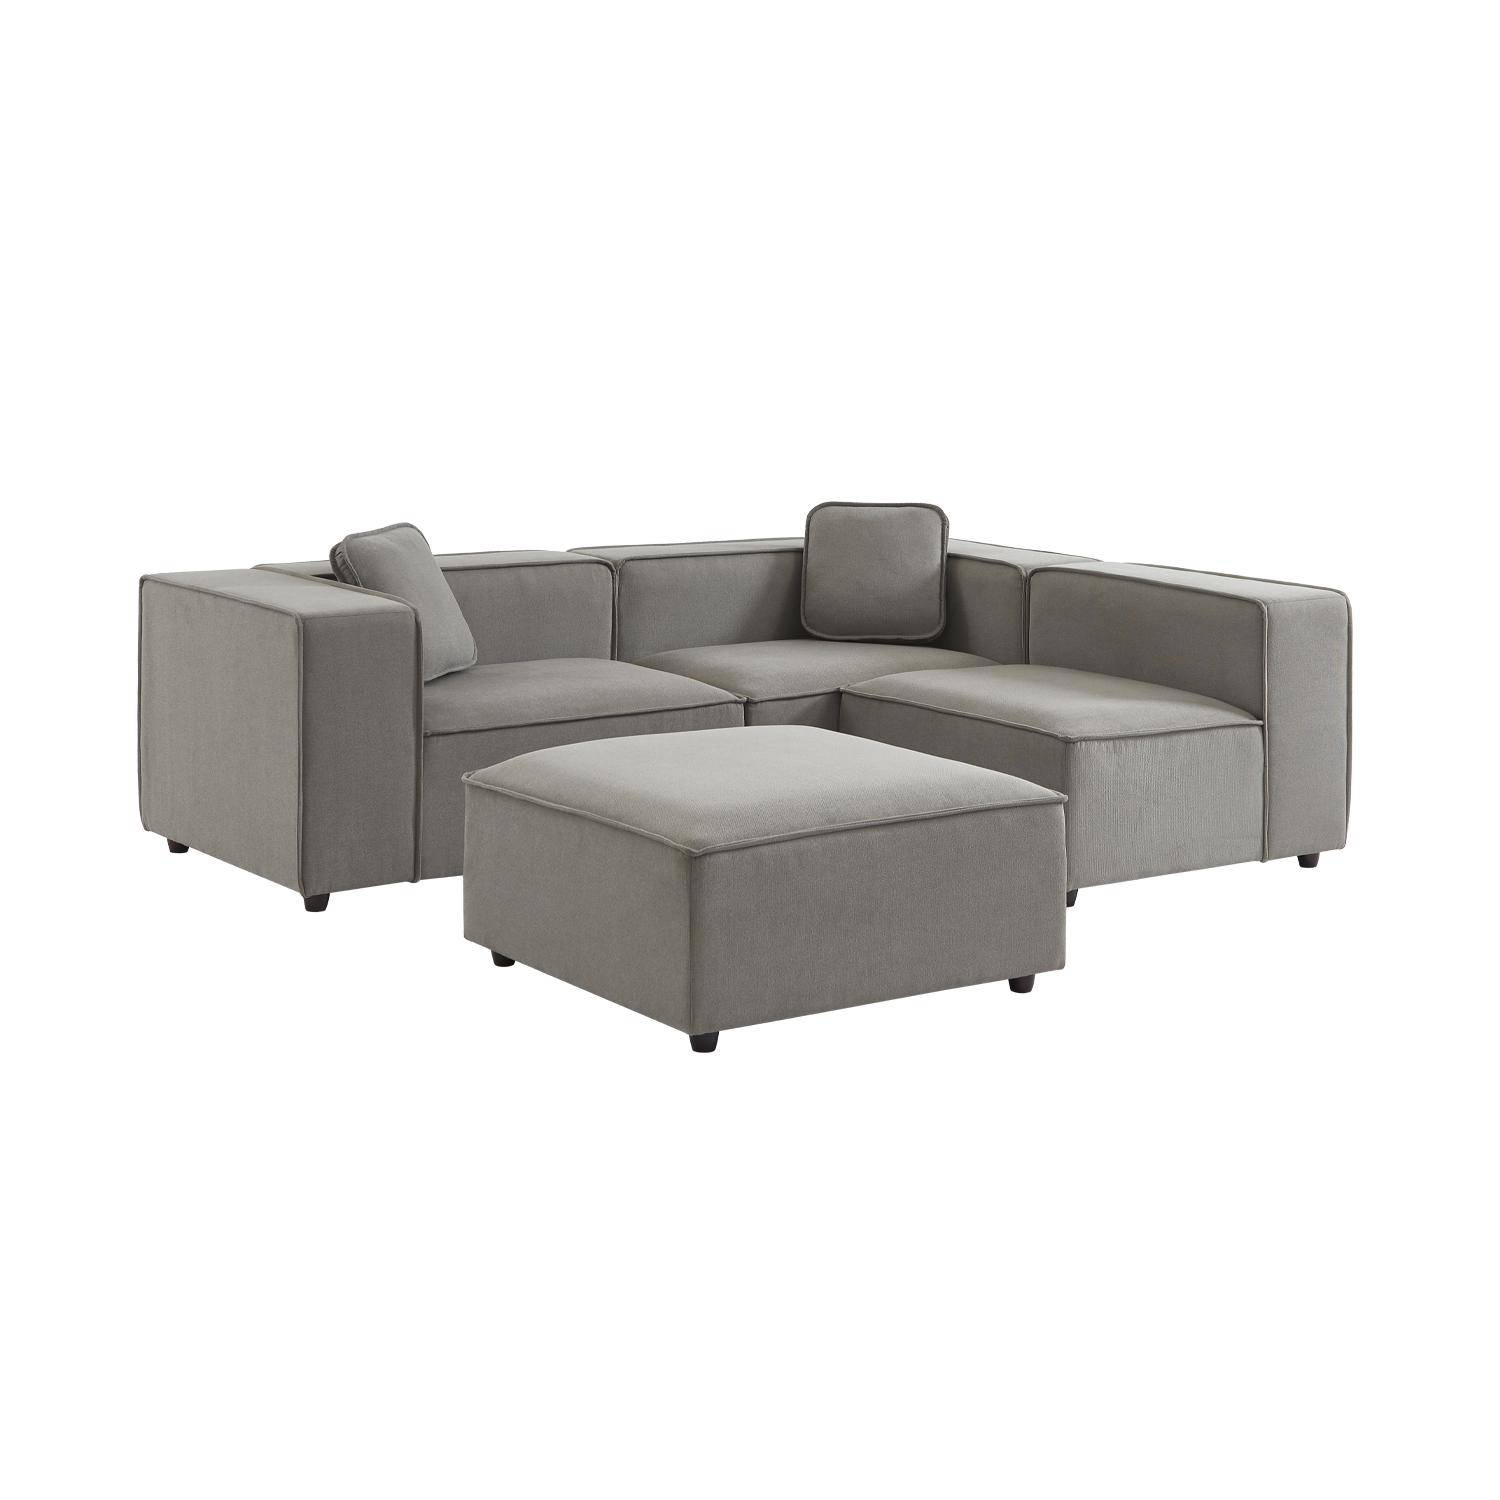 Modular sofa in water-repellent grey fabric for 3-4 people, 2 corners + 1 seat + 1 footstool Photo5